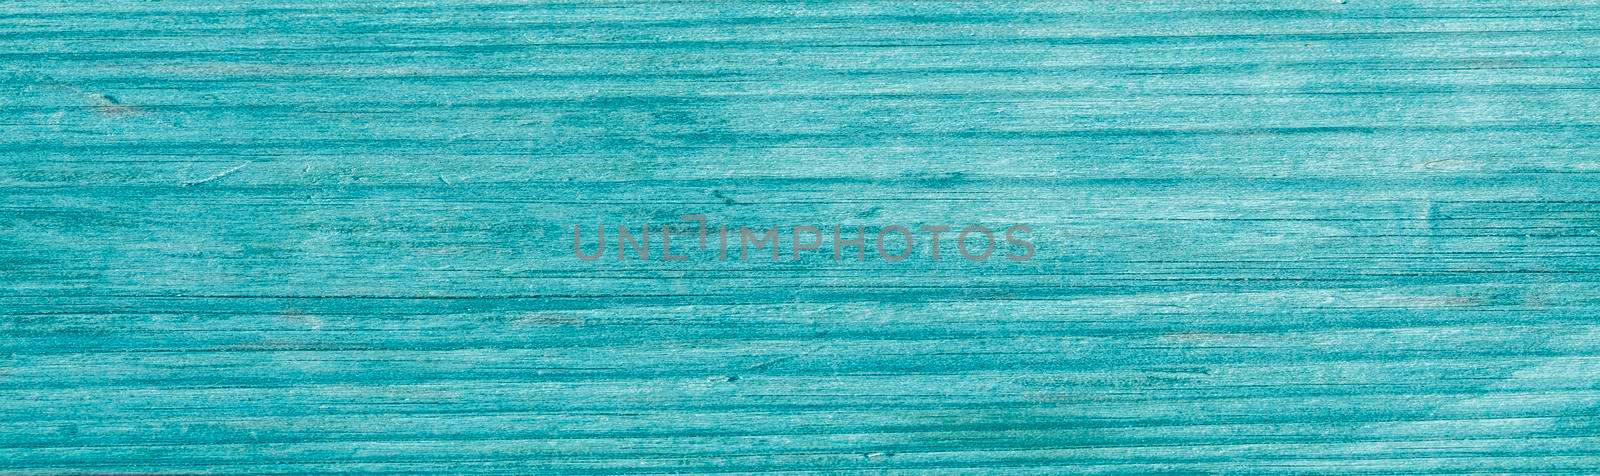 Turquoise wooden banner. Background wooden texture of turquoise color. by Sviatlana